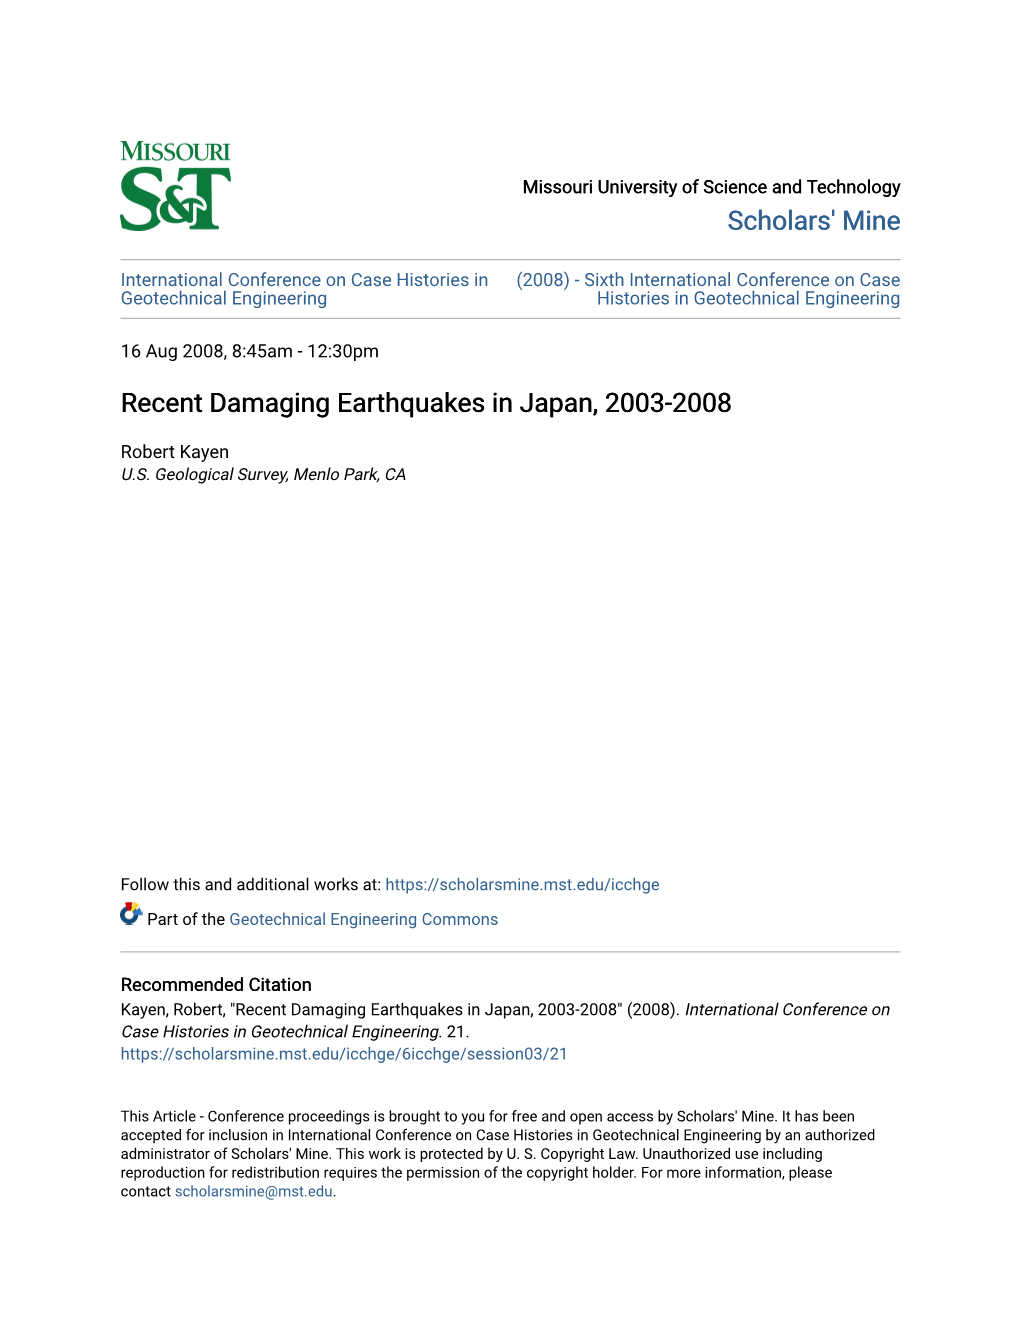 Recent Damaging Earthquakes in Japan, 2003-2008